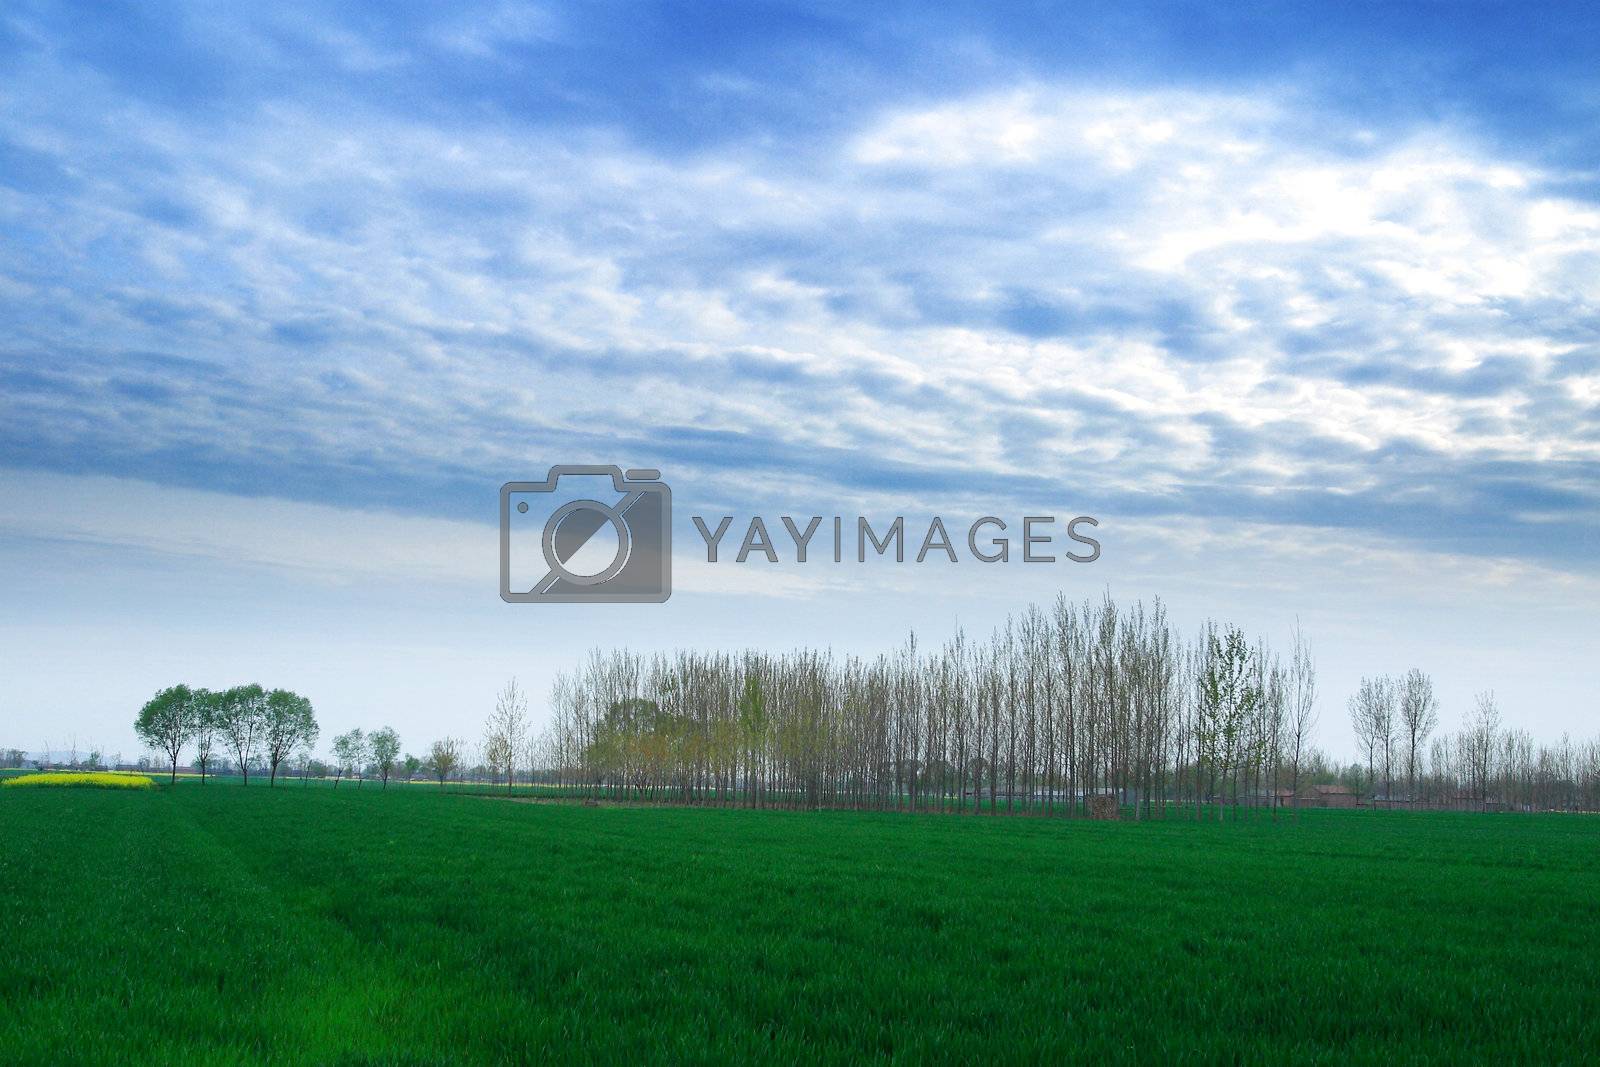 Royalty free image of China Anhui Huaibei,  by xps